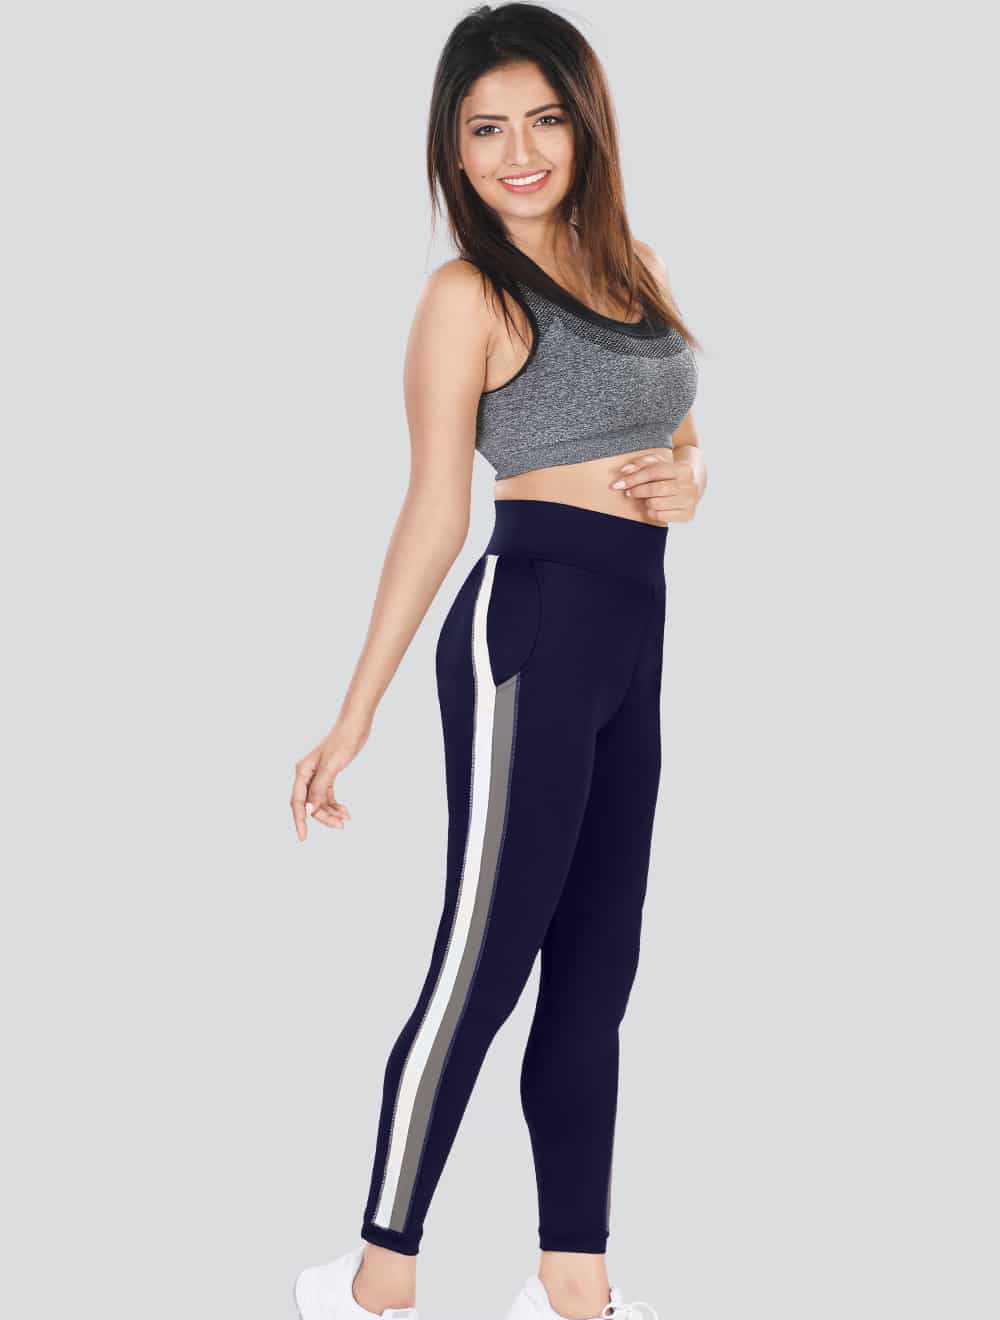 Why are leggings considered pants? - Quora